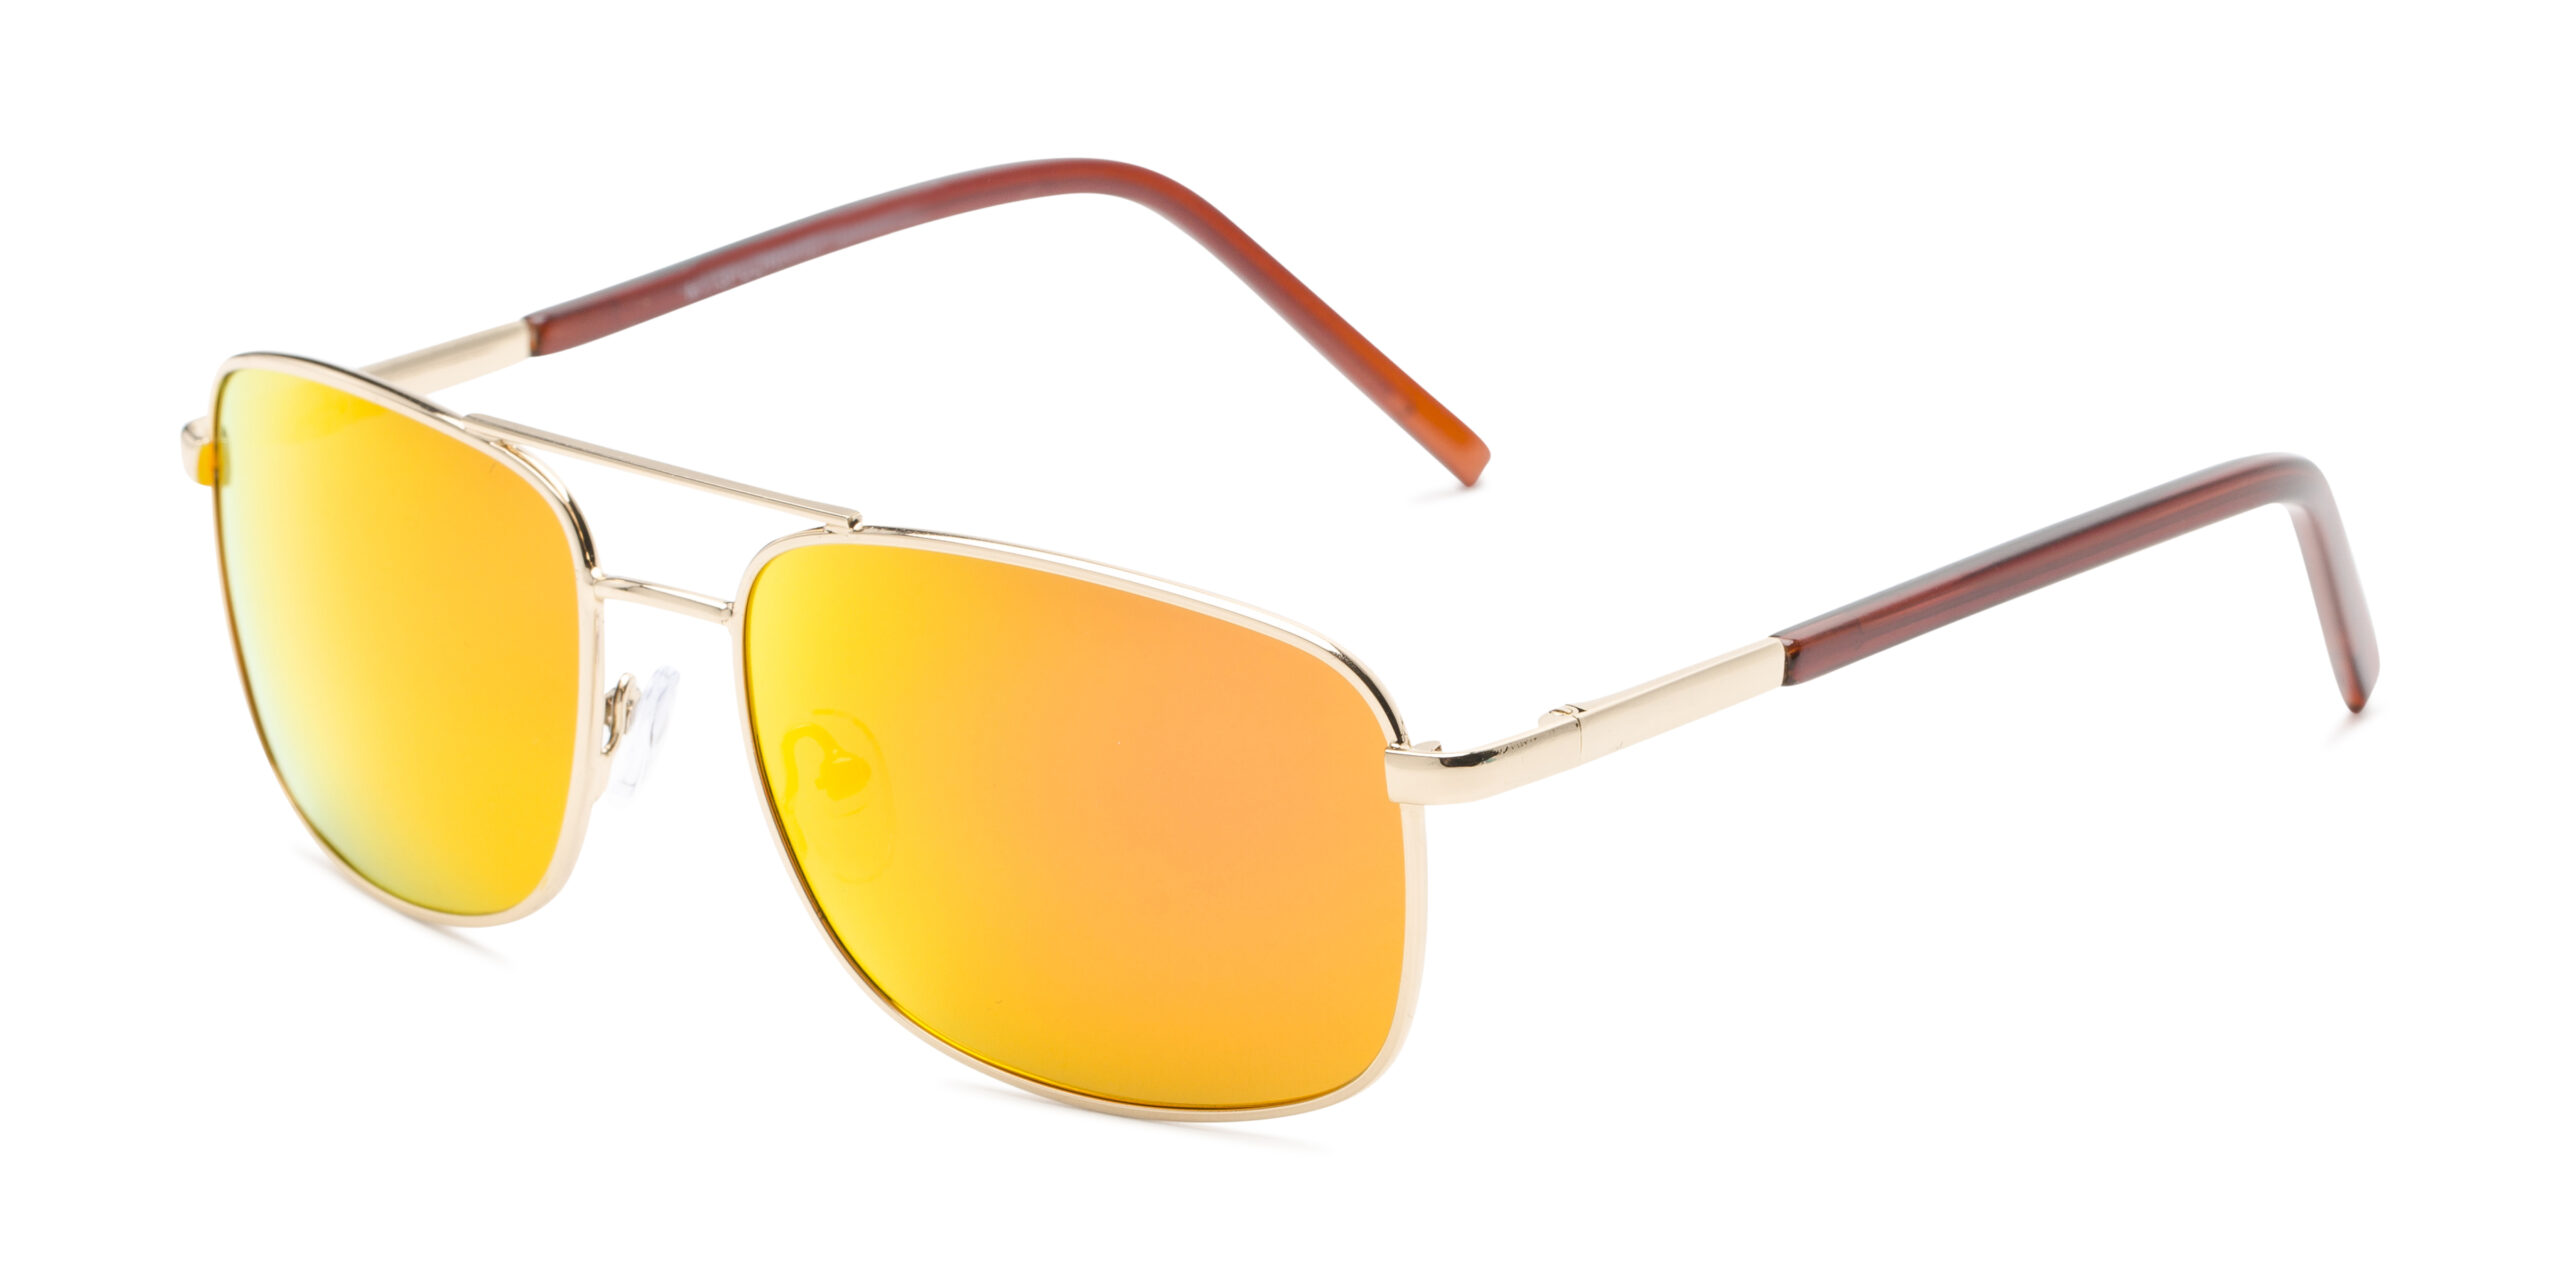 Stratus Gold Frame with Red/Orange Mirrored Lenses - Women of Edm